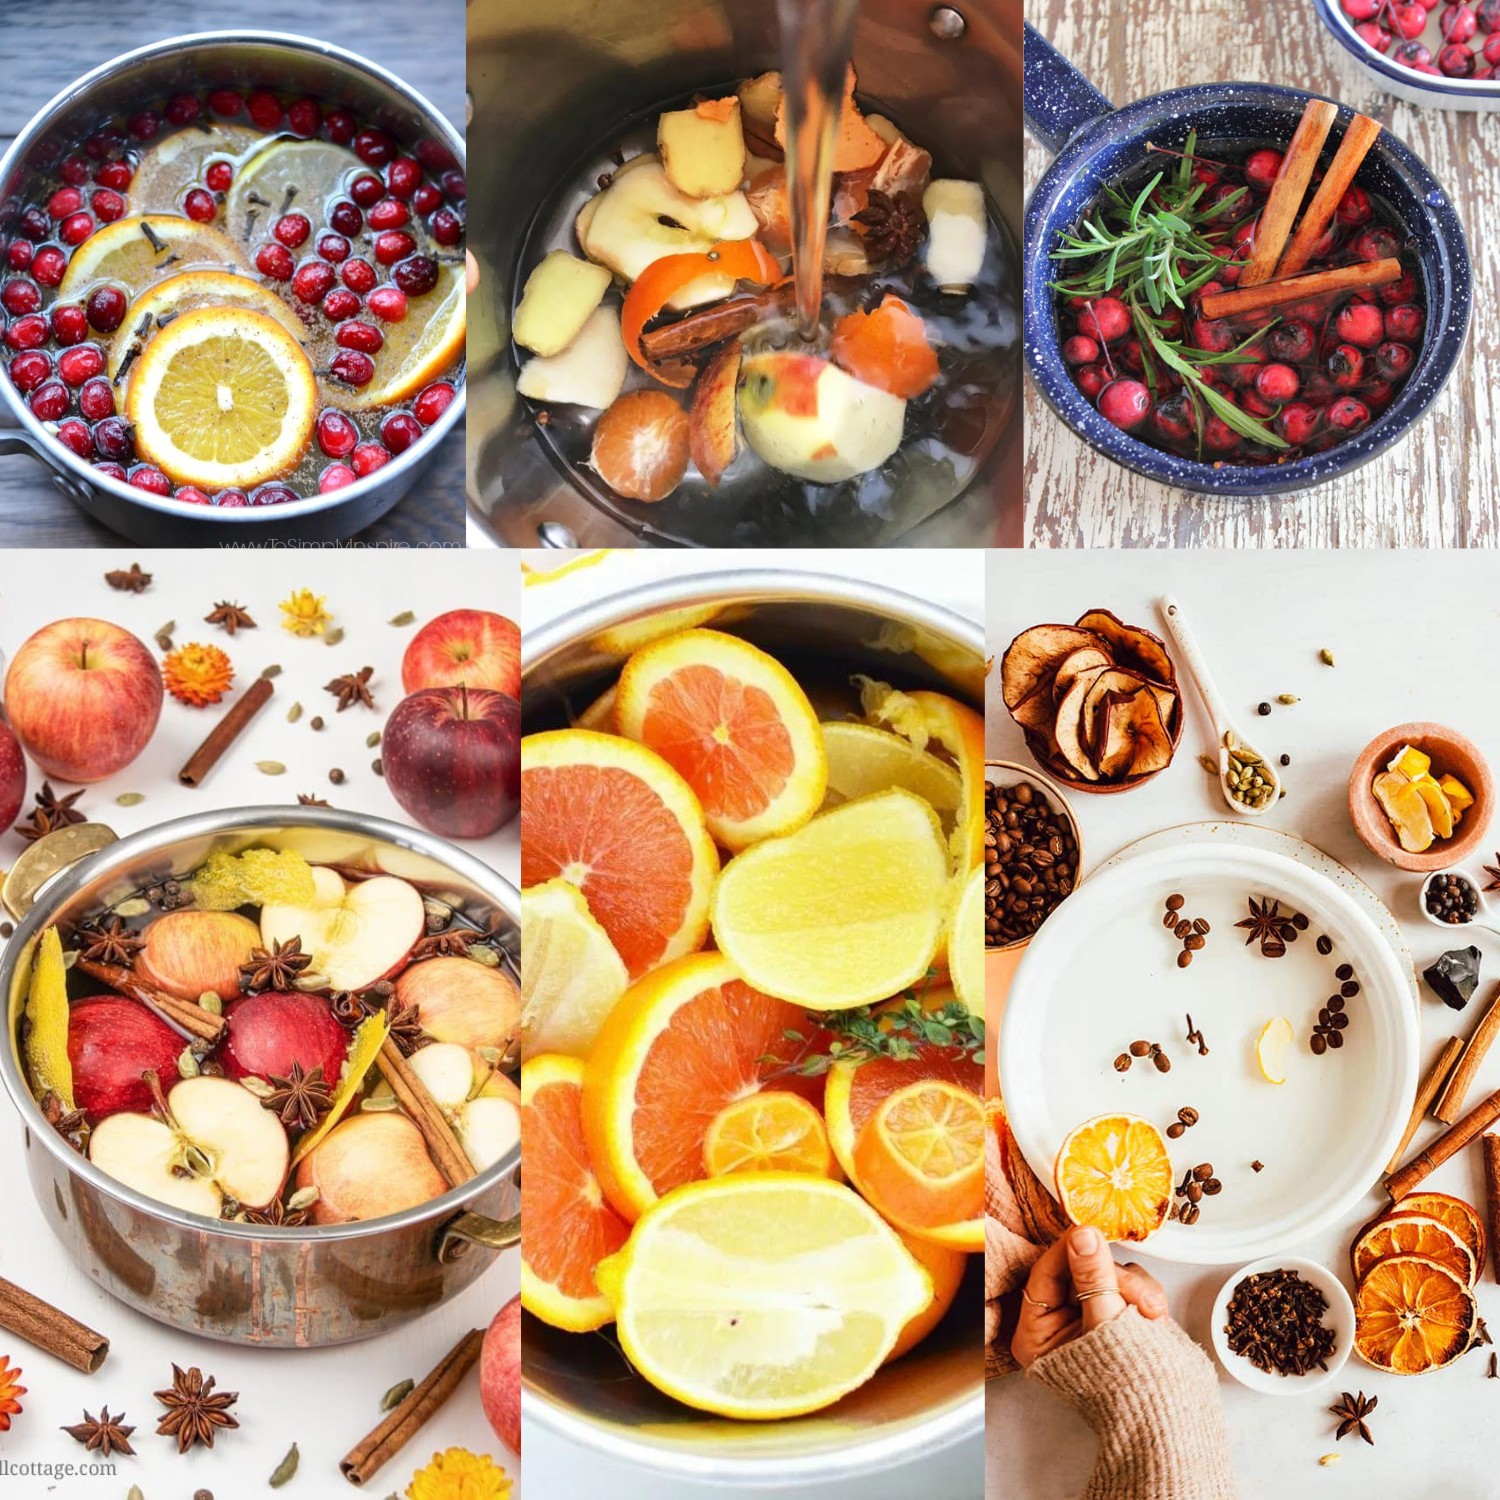 19 Easy Stovetop Potpourri Recipes for Fall - Live Like You Are Rich